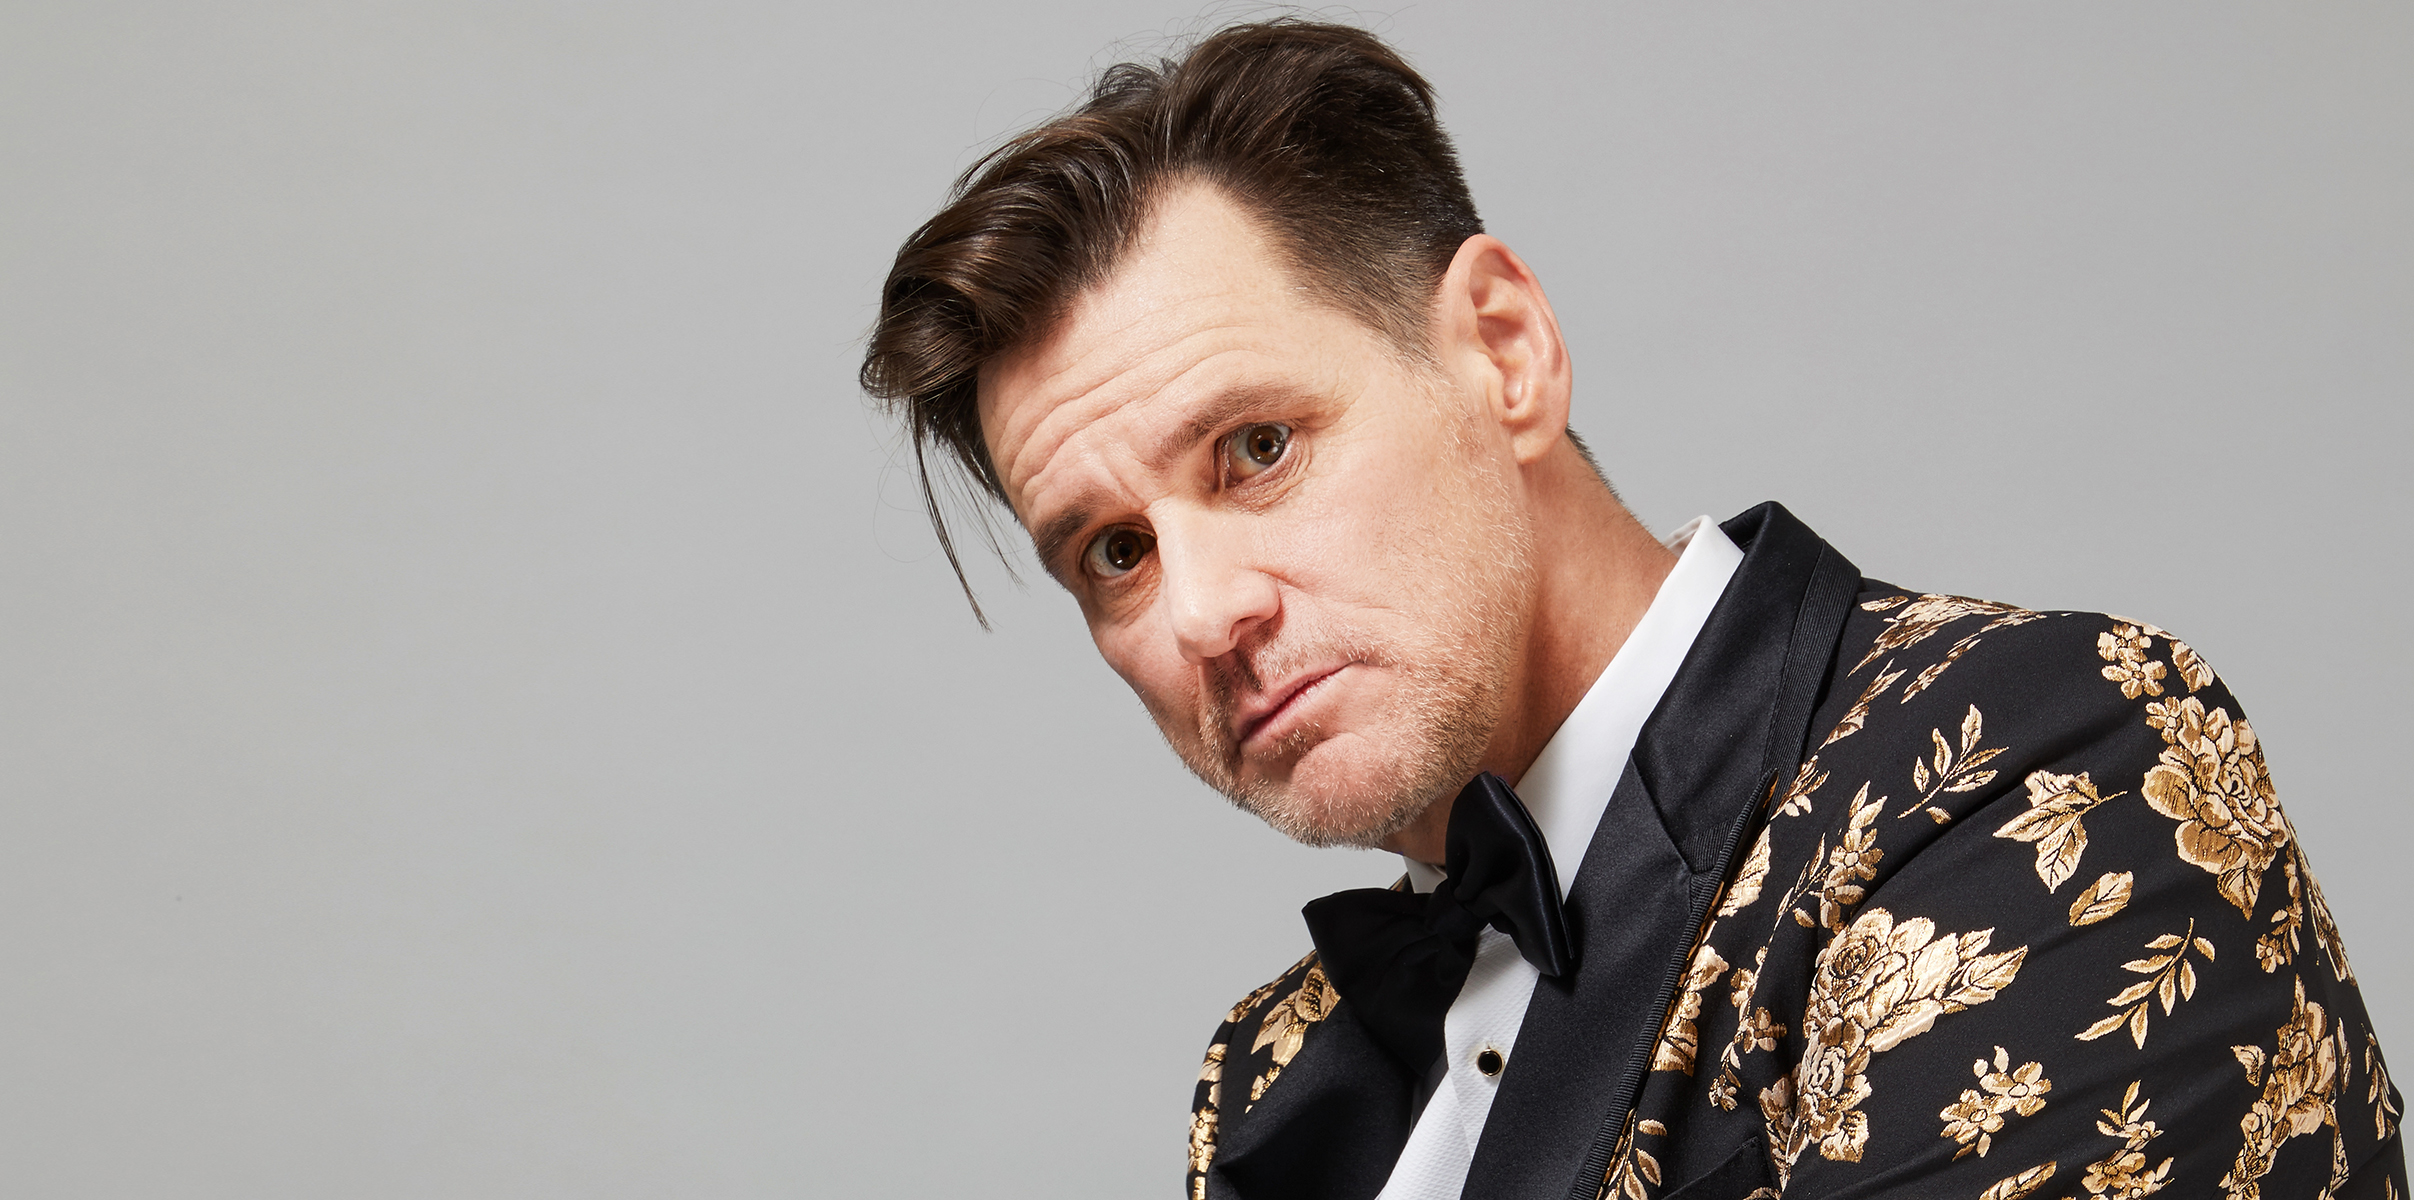 BEVERLY HILLS, CA - OCTOBER 26:  Jim Carrey, recipient of the Charlie Chaplin Britannia Award for Excellence in Comedy, poses in the portrait studio at the 2018 British Academy Britannia Awards at The Beverly Hilton Hotel on October 26, 2018 in Beverly Hills, California.  (Photo by Martha Galvan/BAFTA LA/Getty Images)